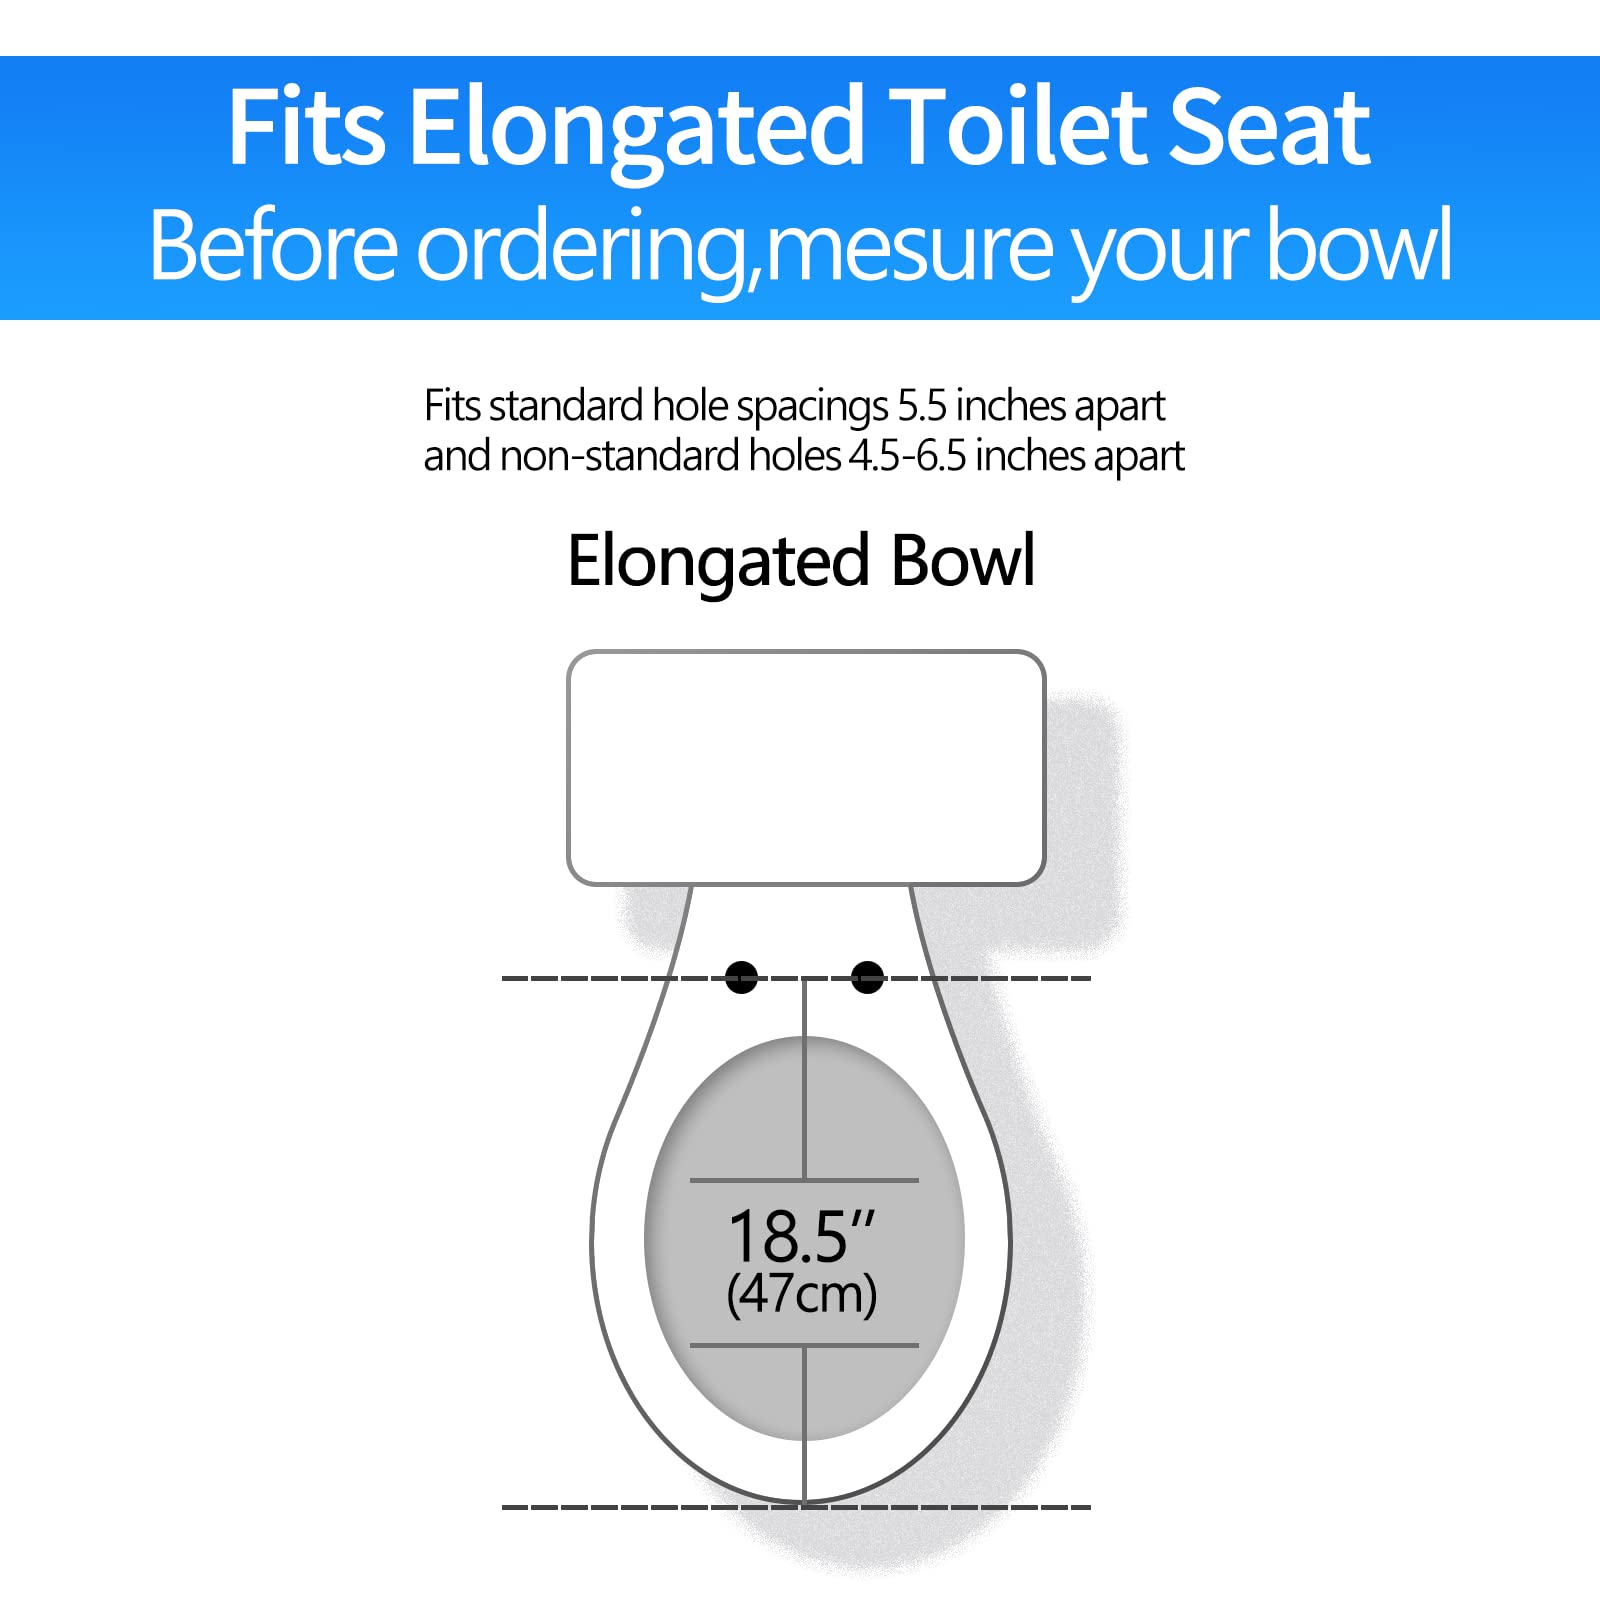 MUU Toilet seat, Slow Close, White heavy duty Toilet Seat with Non-slip Seat Bumpers Easy to Install & Clean PP Material Replacement Toilet Seat Fits All Toilet Brands Elongated Toilets(MU220-PP)